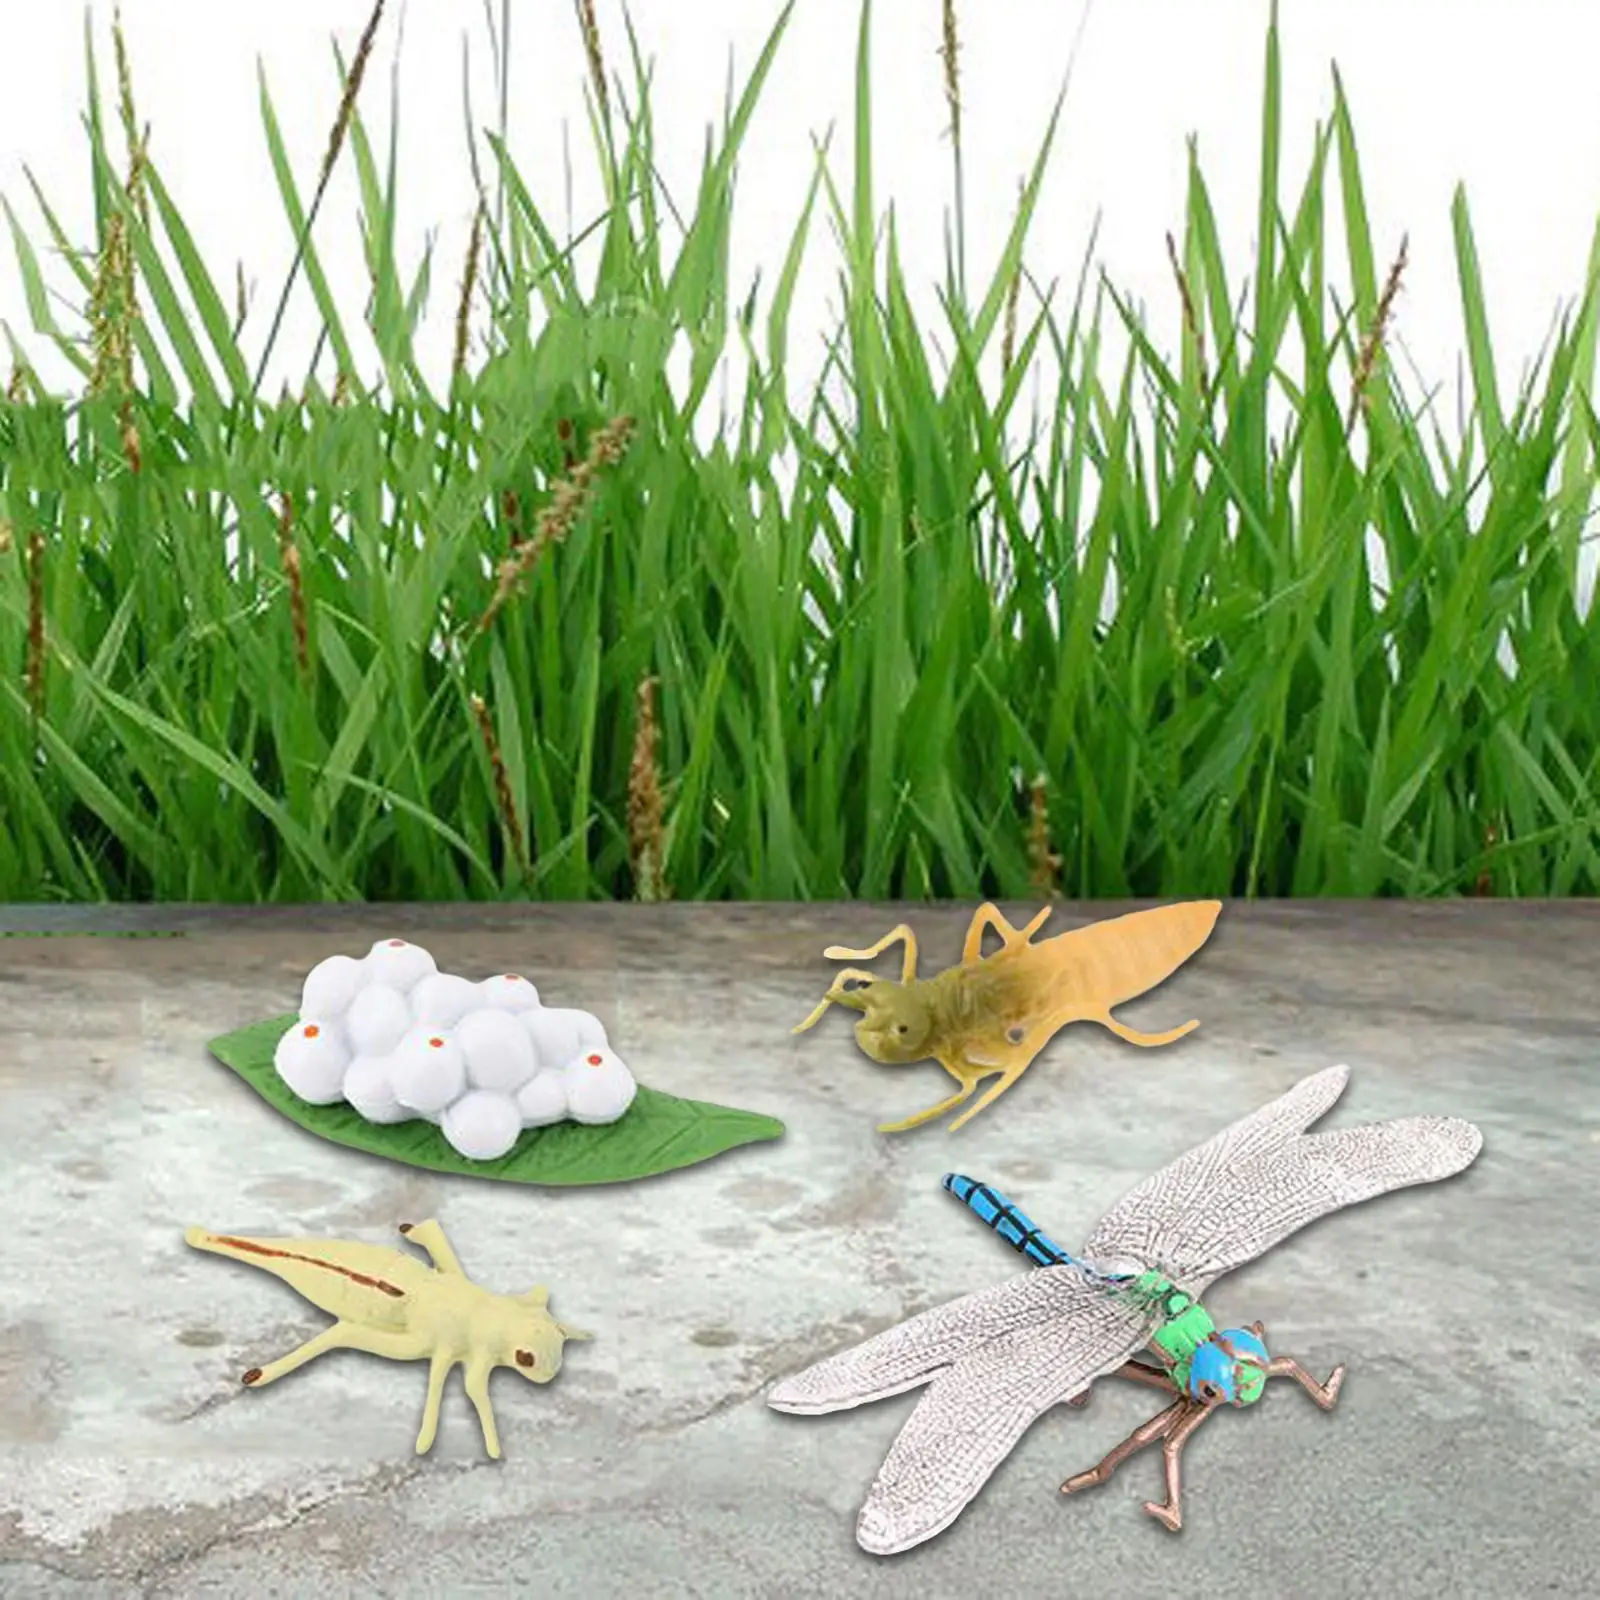 Simulation Life Cycle Figurines Red Eyed Tree Frog Figures Dragonfly Figures Early Education Animal Growth Cycle for Kids